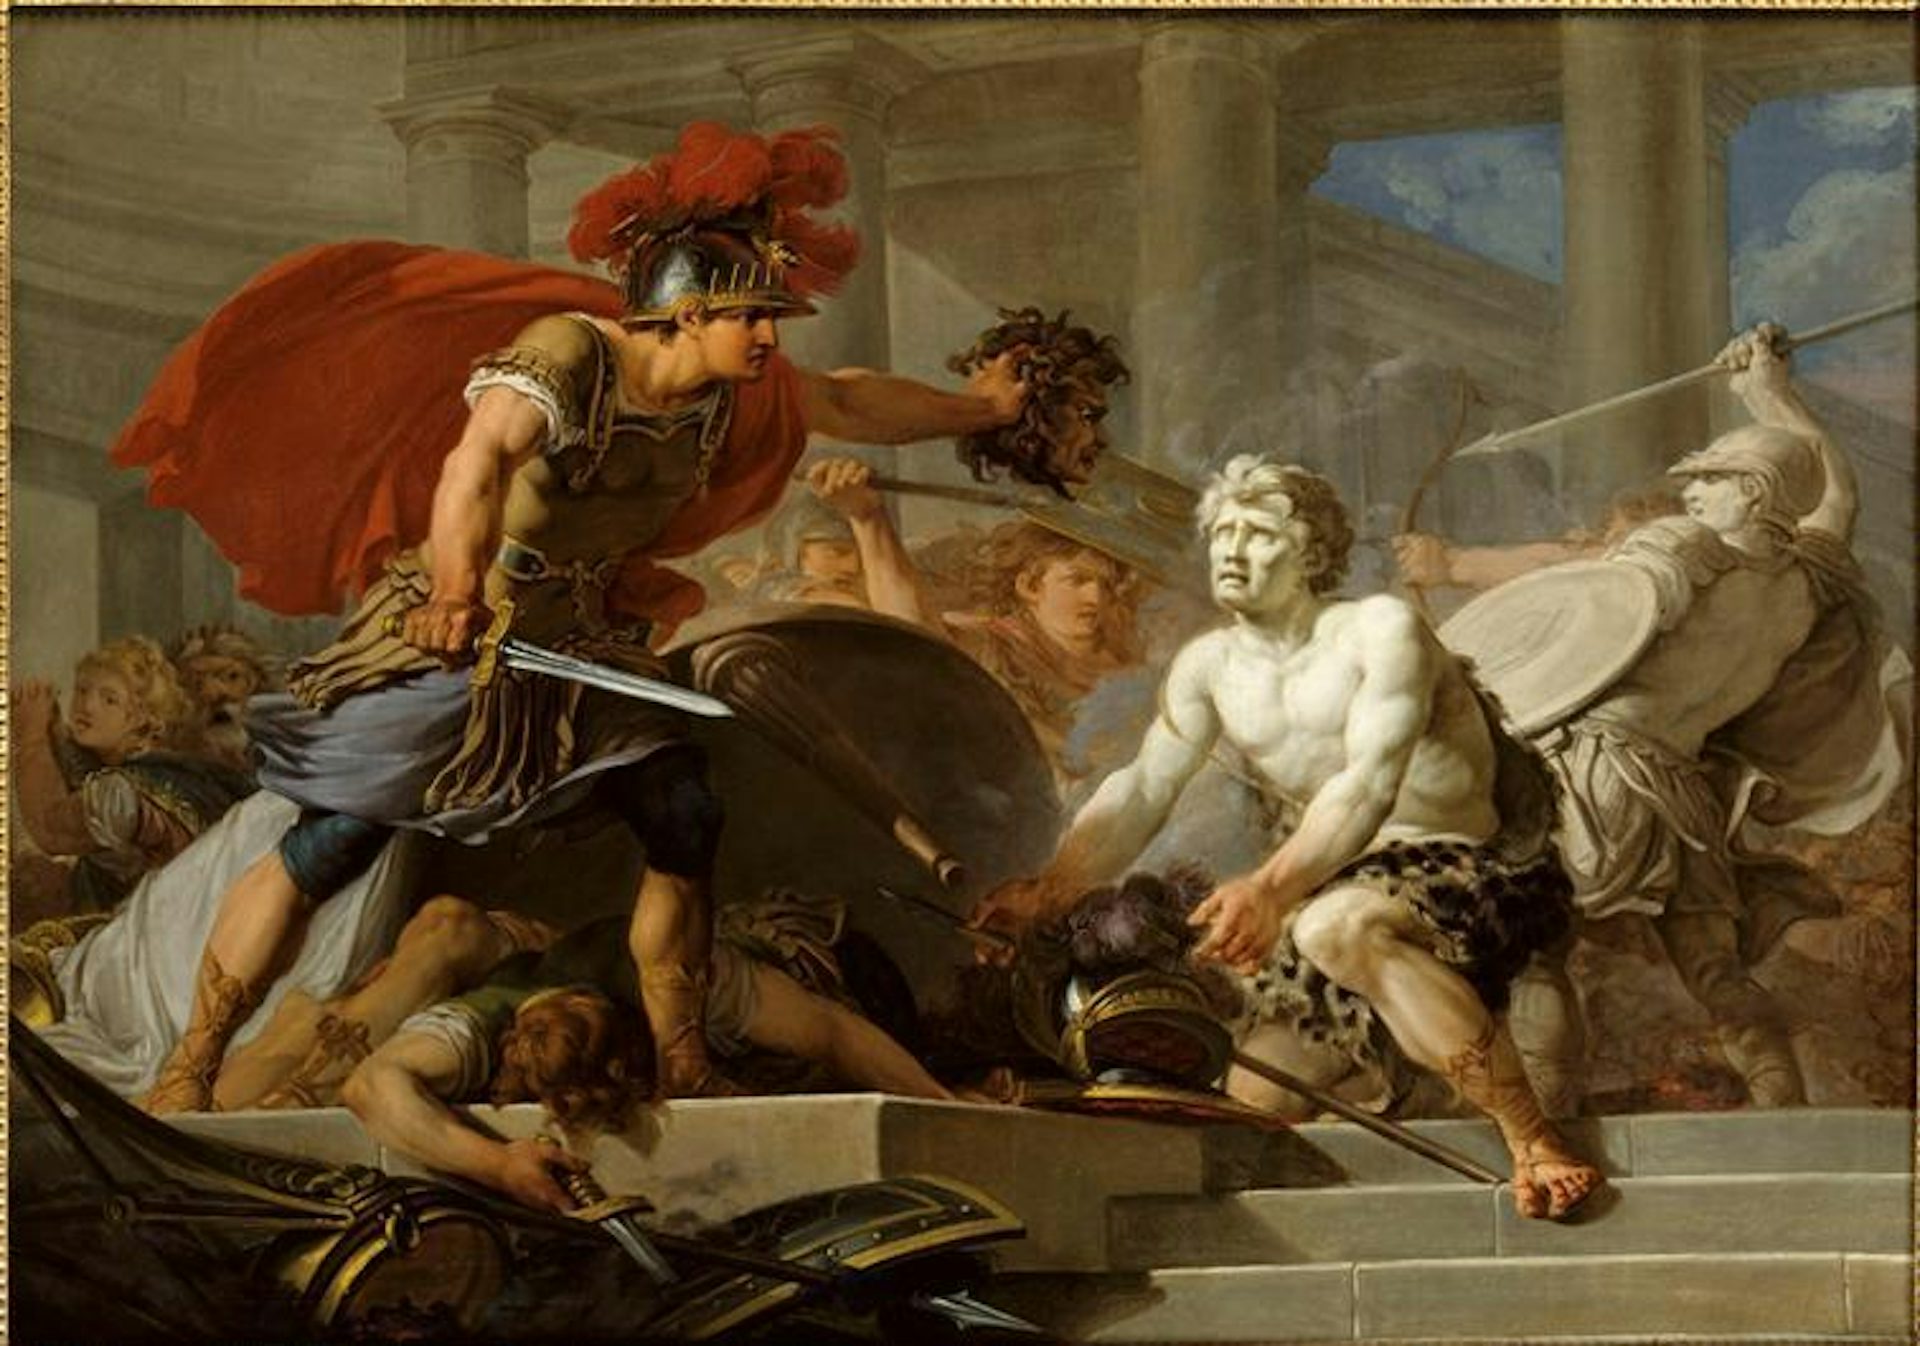 The Wedding of Perseus Interrupted by Phineus by Hugues Taraval